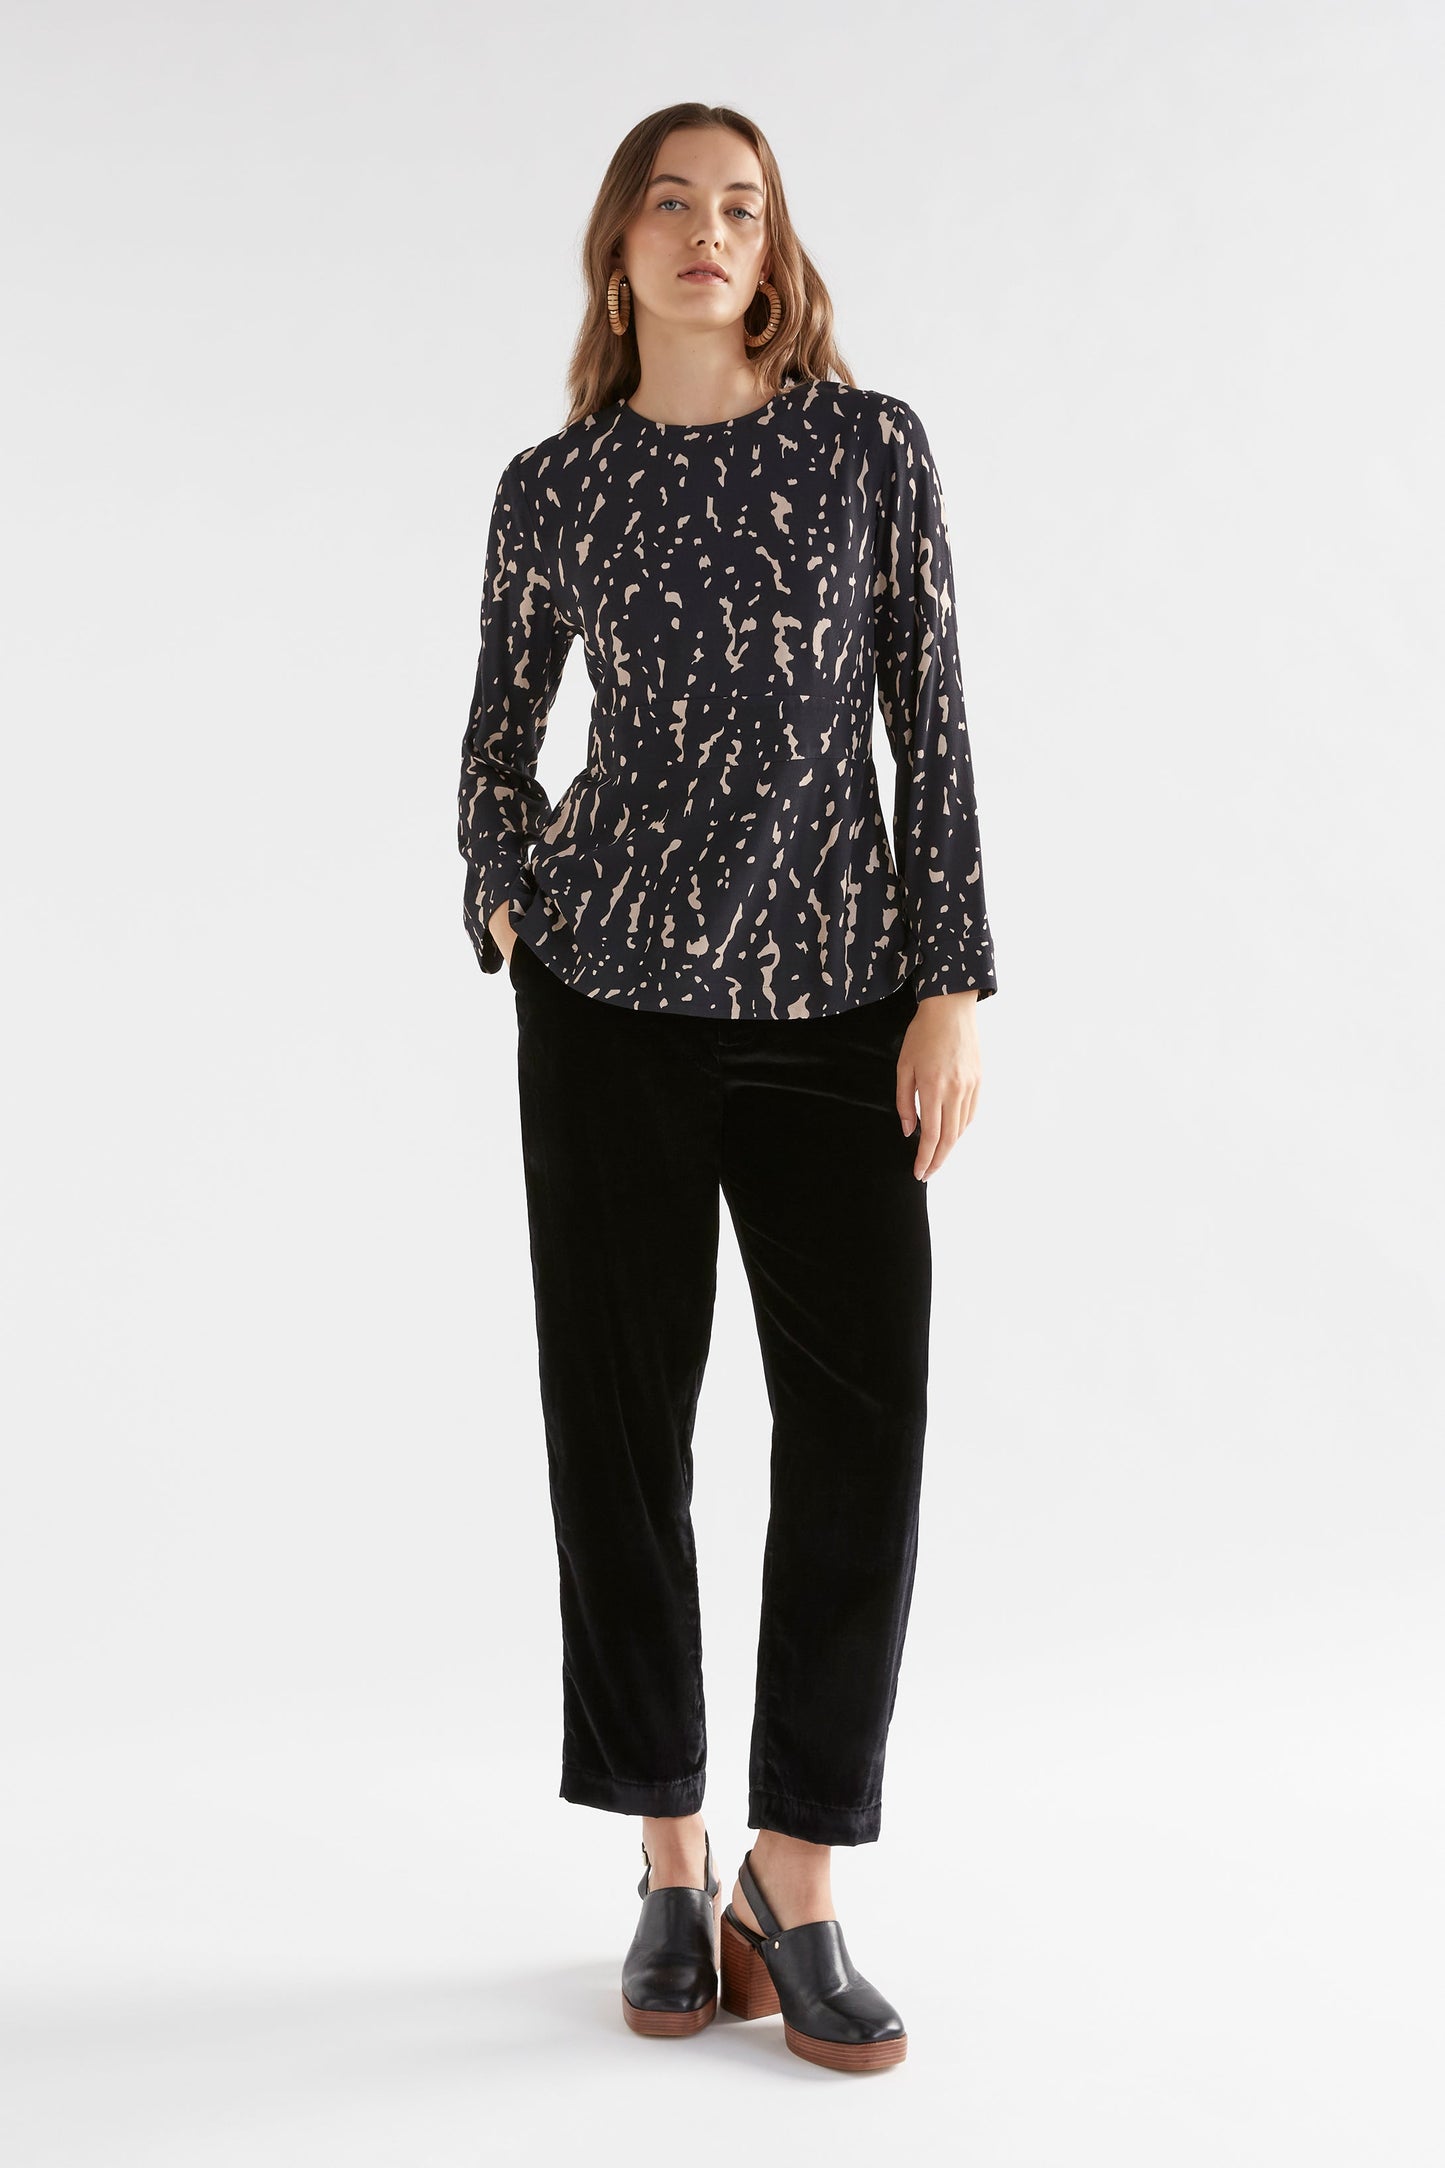 Solina Long Sleeve Waisted Crew Neck Top with Shirring Detail Model Front Full body | GIOTTO PRINT